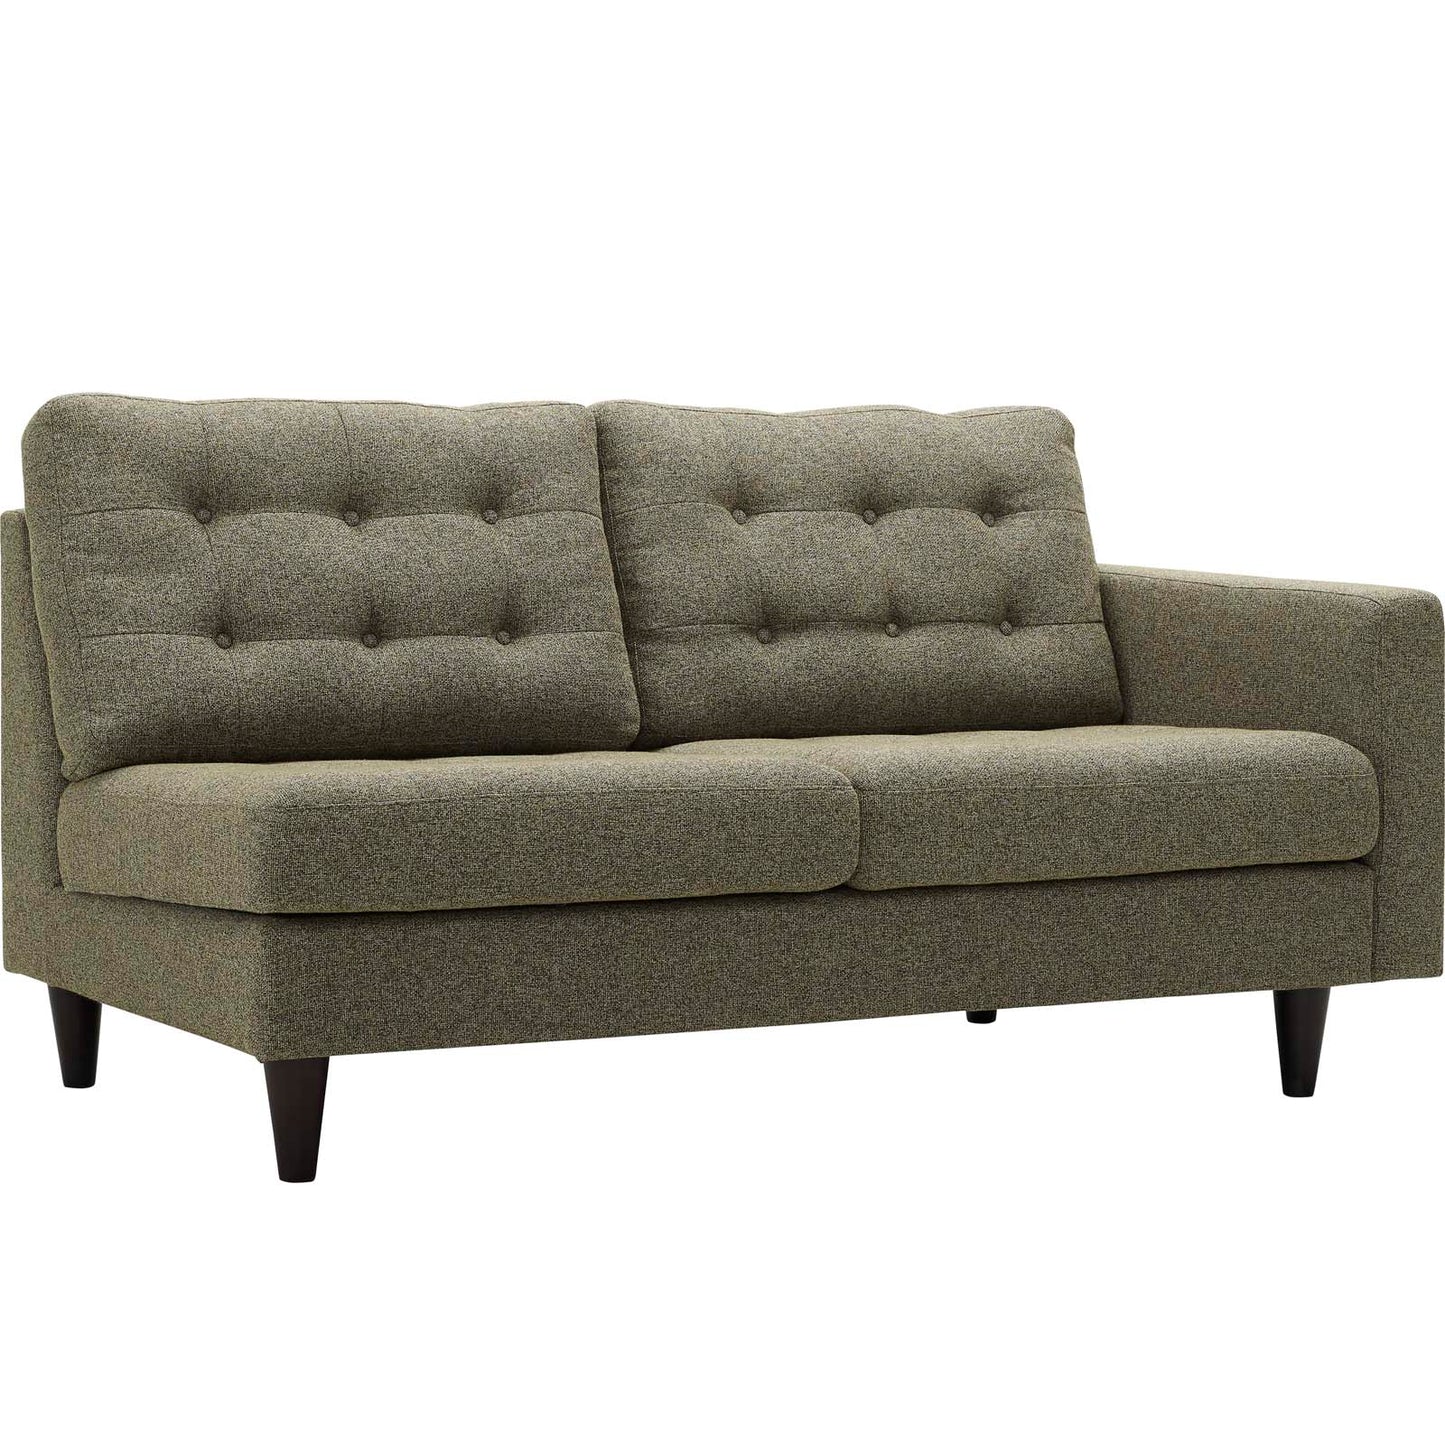 Empress Right-Facing Upholstered Fabric Loveseat Oatmeal EEI-2595-OAT